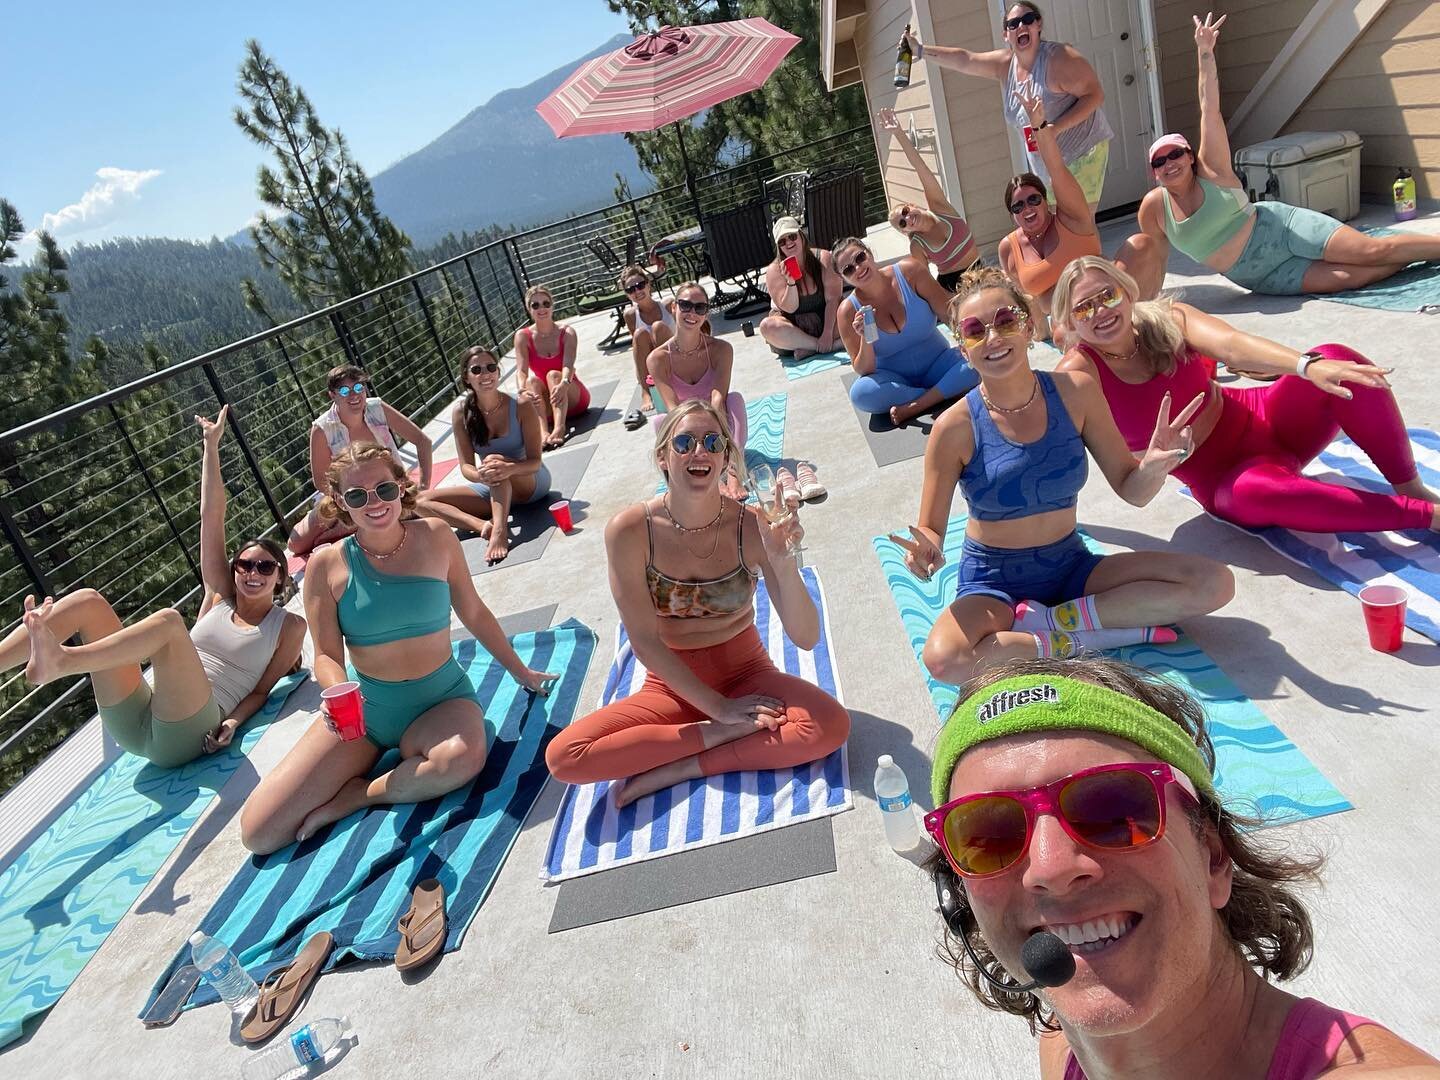 Weekends in summer are booking up fast! Lock in your private Swami Mosa session for your party while you still can!

Or let&rsquo;s do a Tuesday. I&rsquo;m free. 

#swamimosa #swamimosayoga #tahoe #thingstodointahoe #yoga #comedyyoga #bachelorettepar